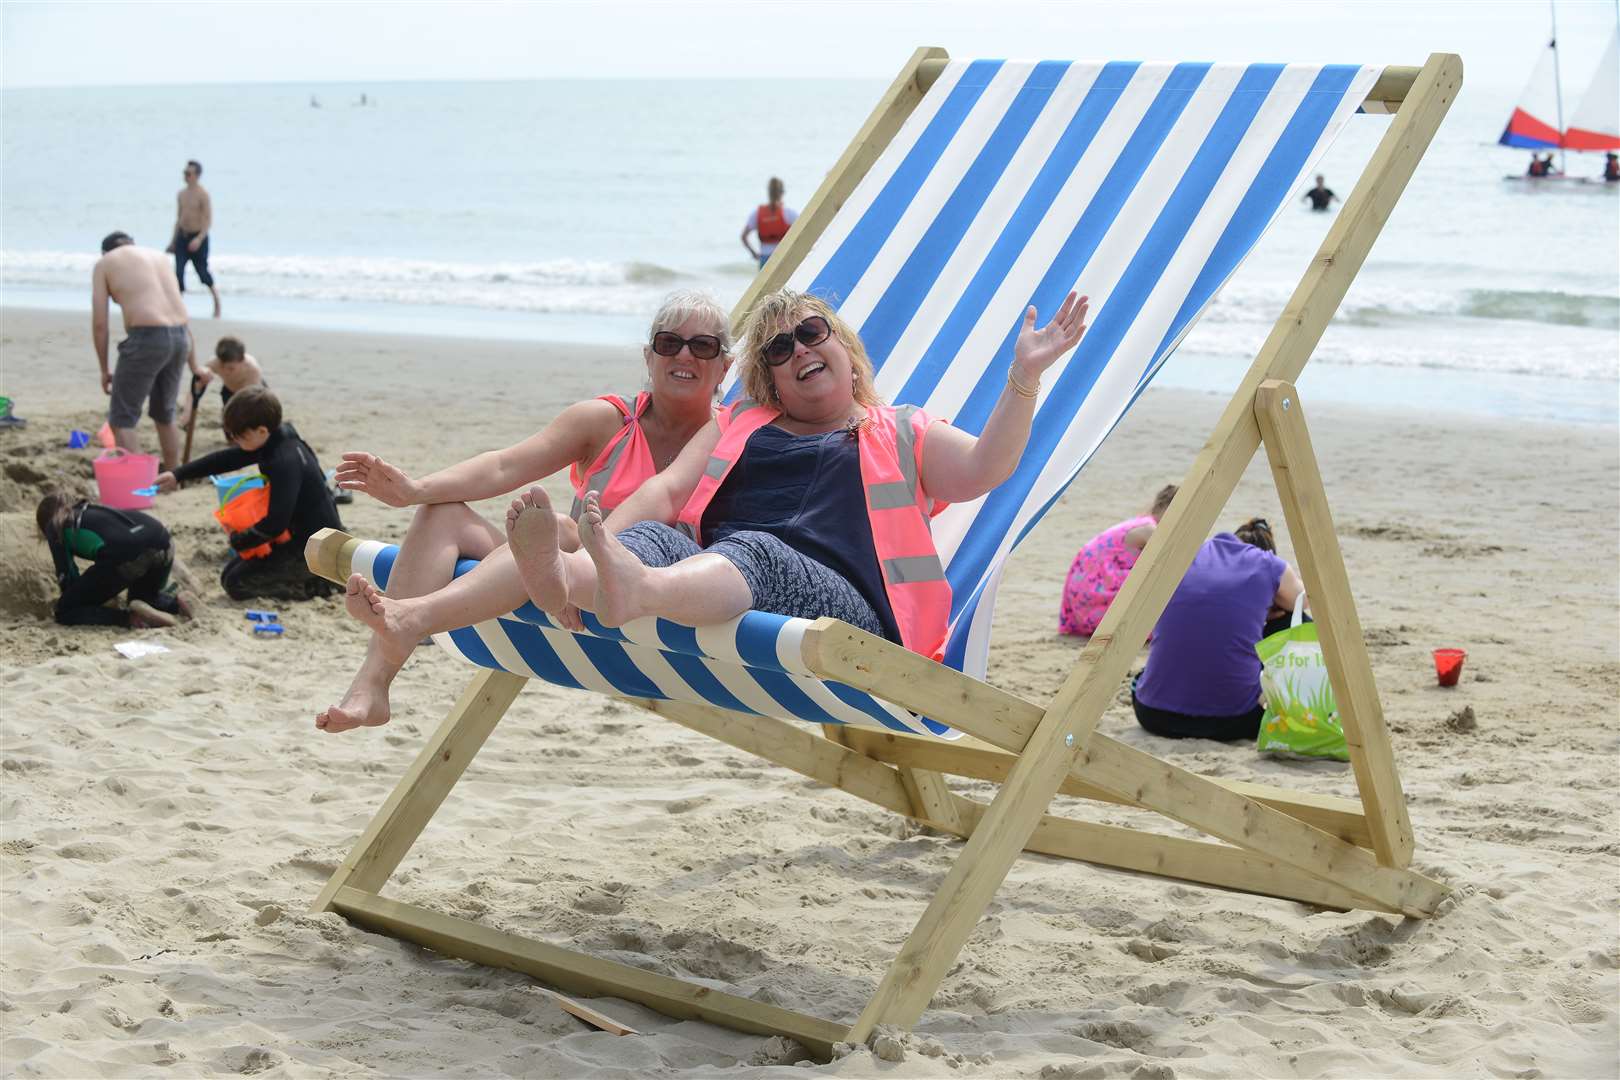 Organisers, Cath Mison and Sue Pope cracking open the abnormally large deck chair